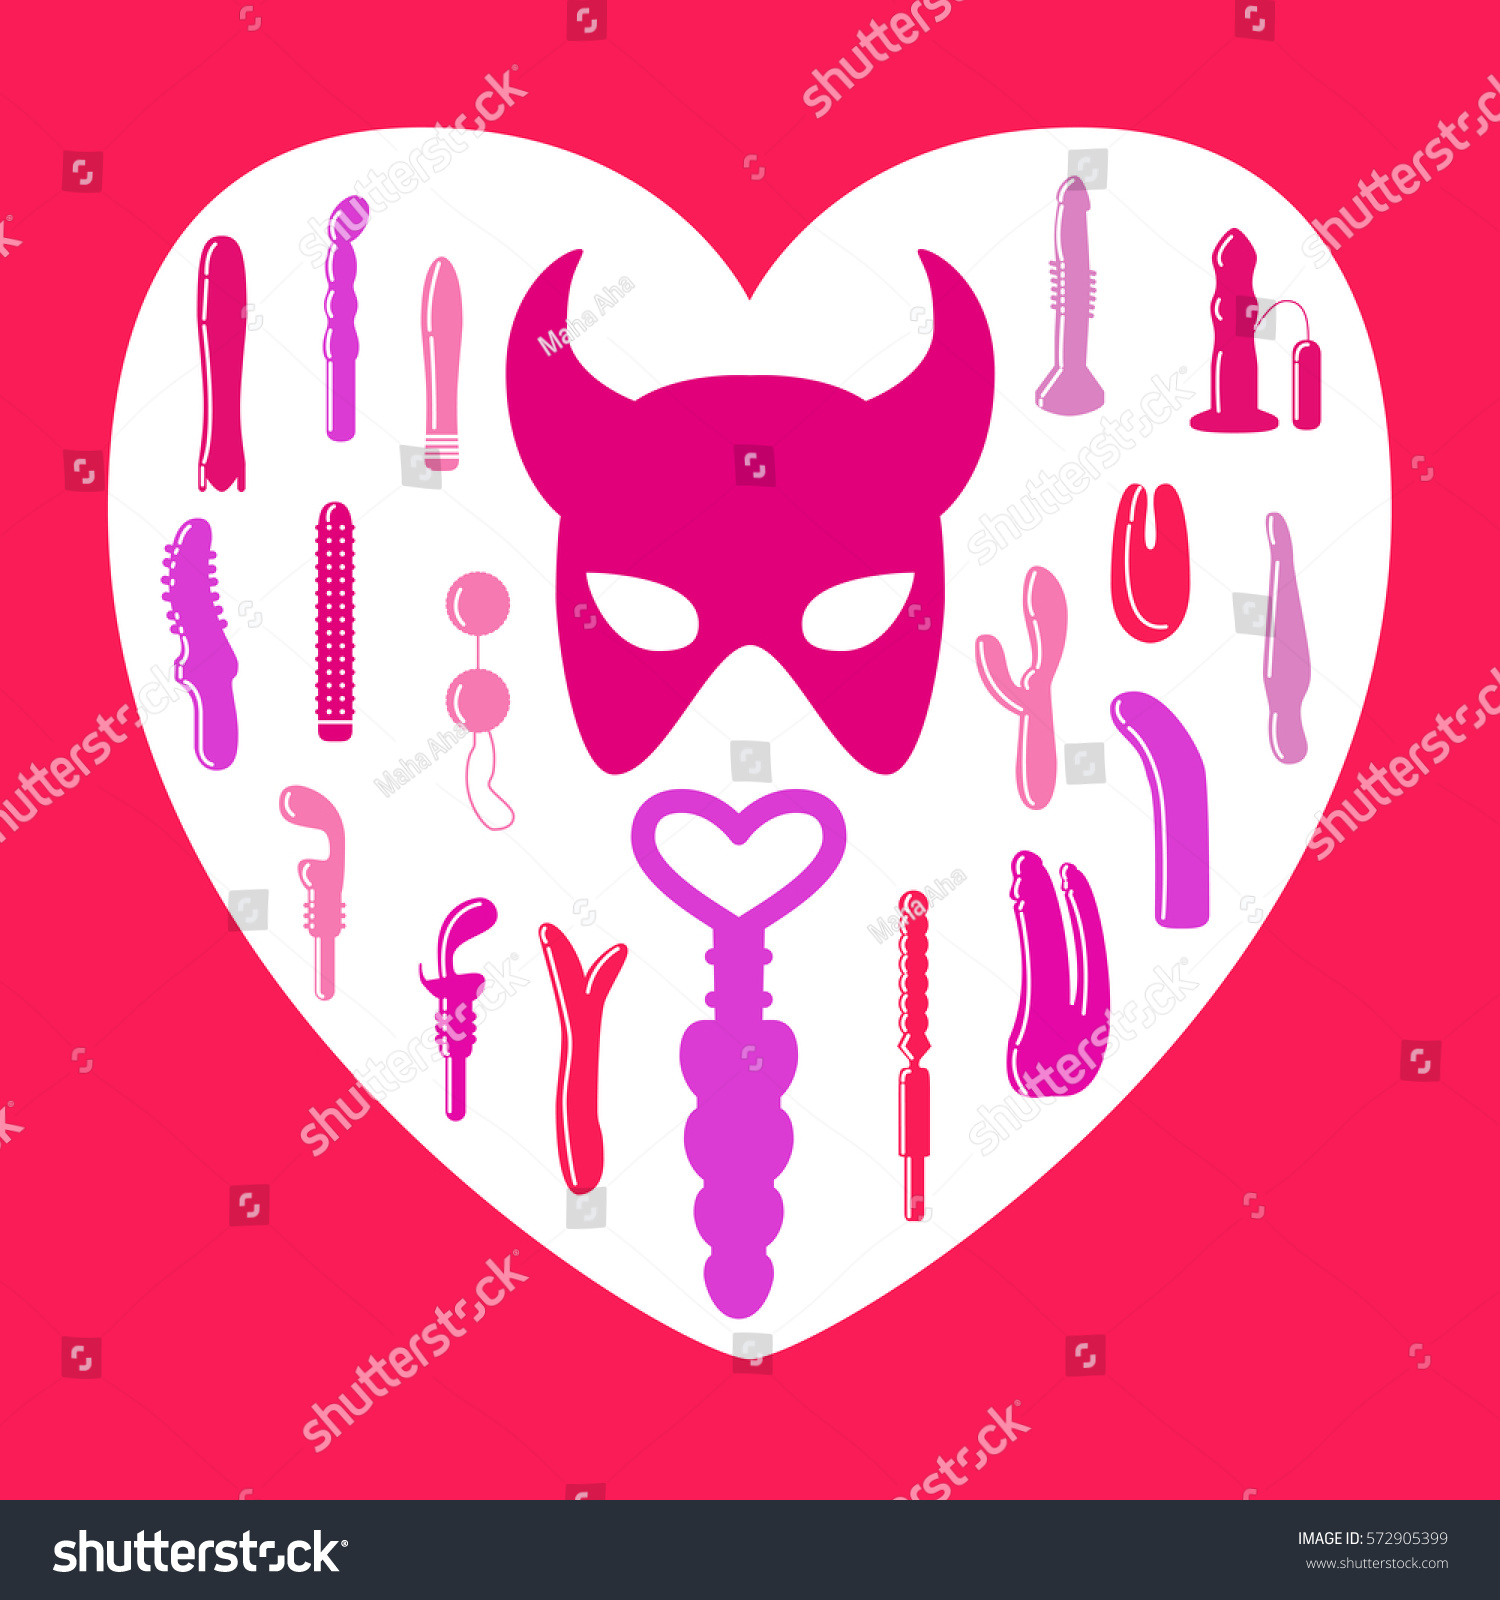 Adult Sex Toys Silhouettes Mask Different Stock Vector Royalty Free 572905399 Shutterstock 4953